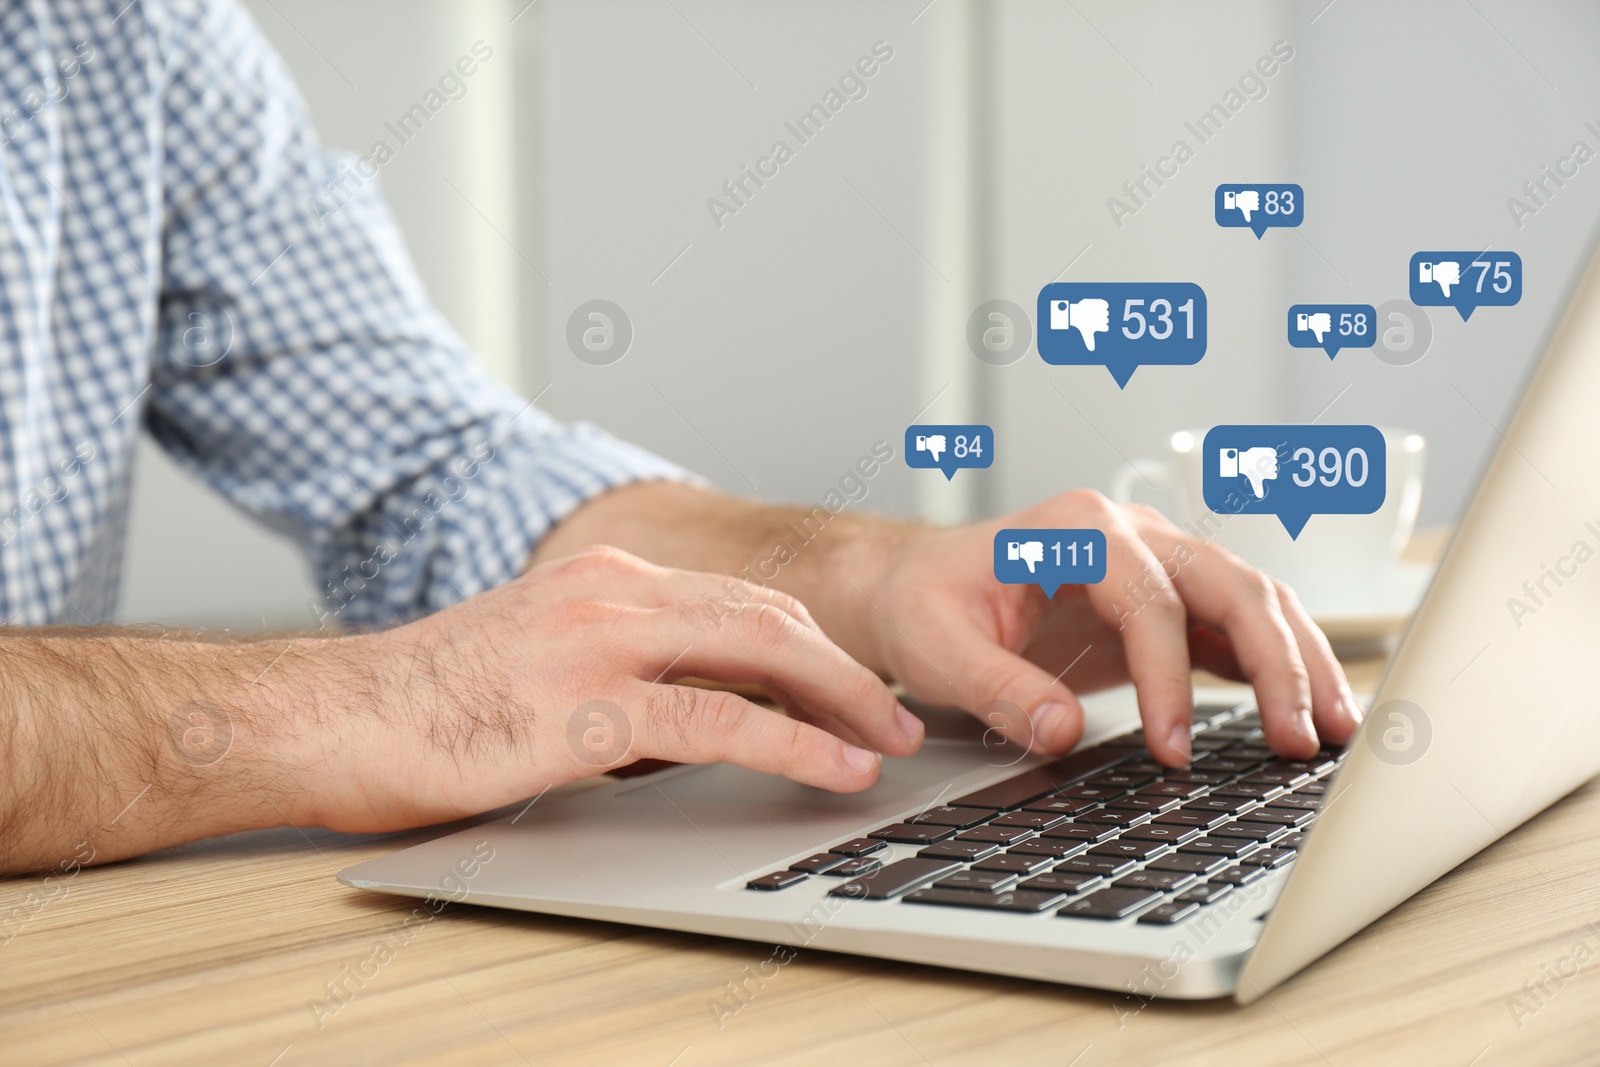 Image of Closeup view of young man using modern laptop at wooden table. Cyberbullying concept